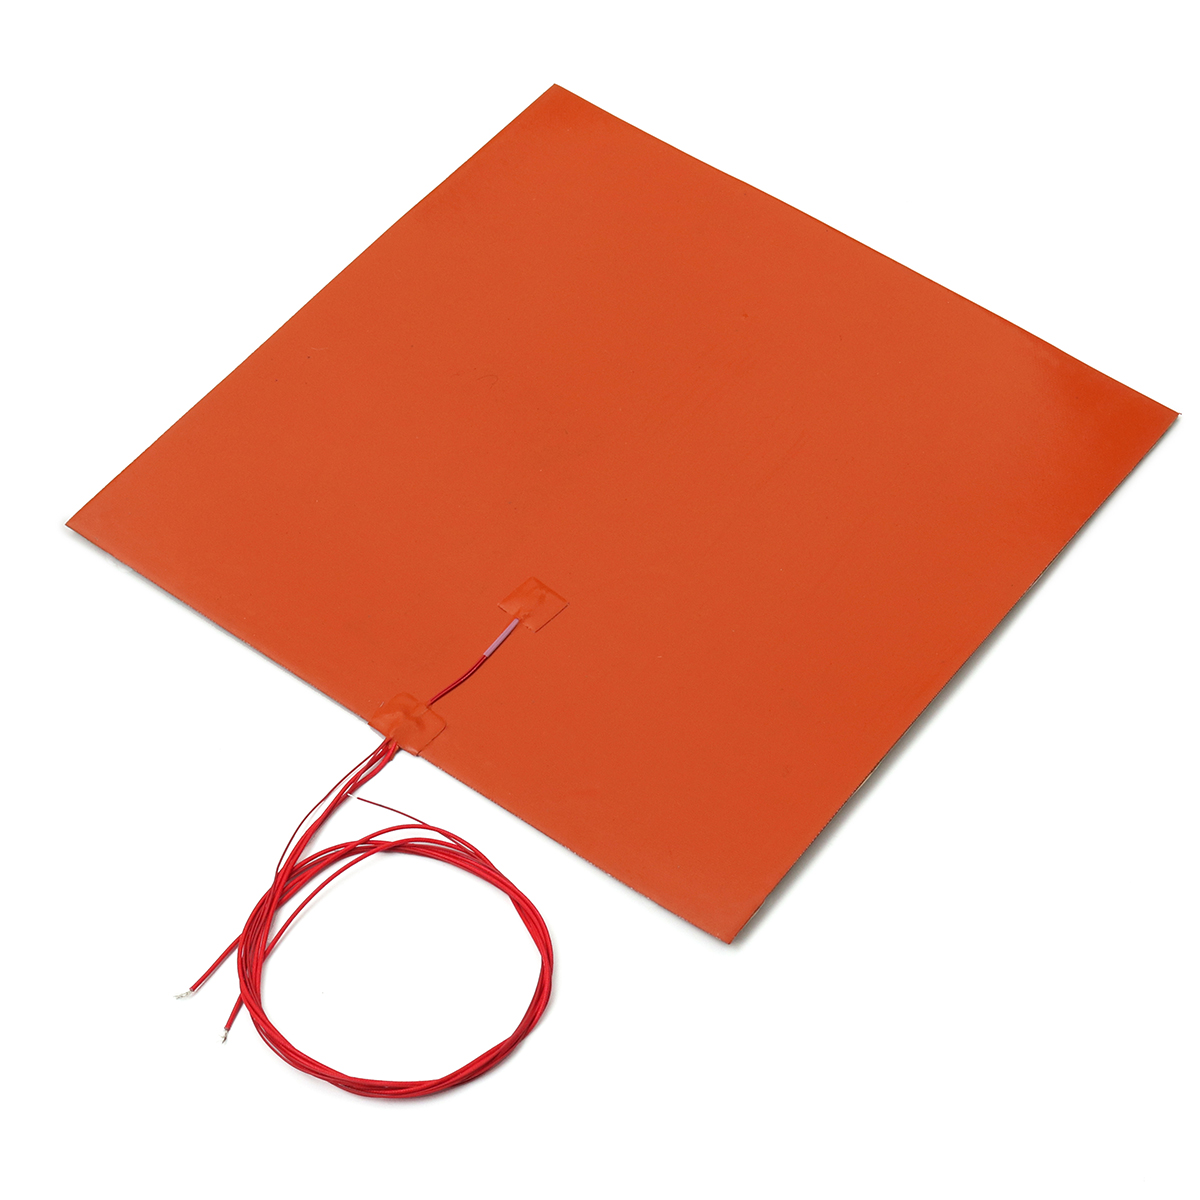 1400w 240V 400*400mm Silicone Heater Bed Pad For 3D Printer Without Hole 10